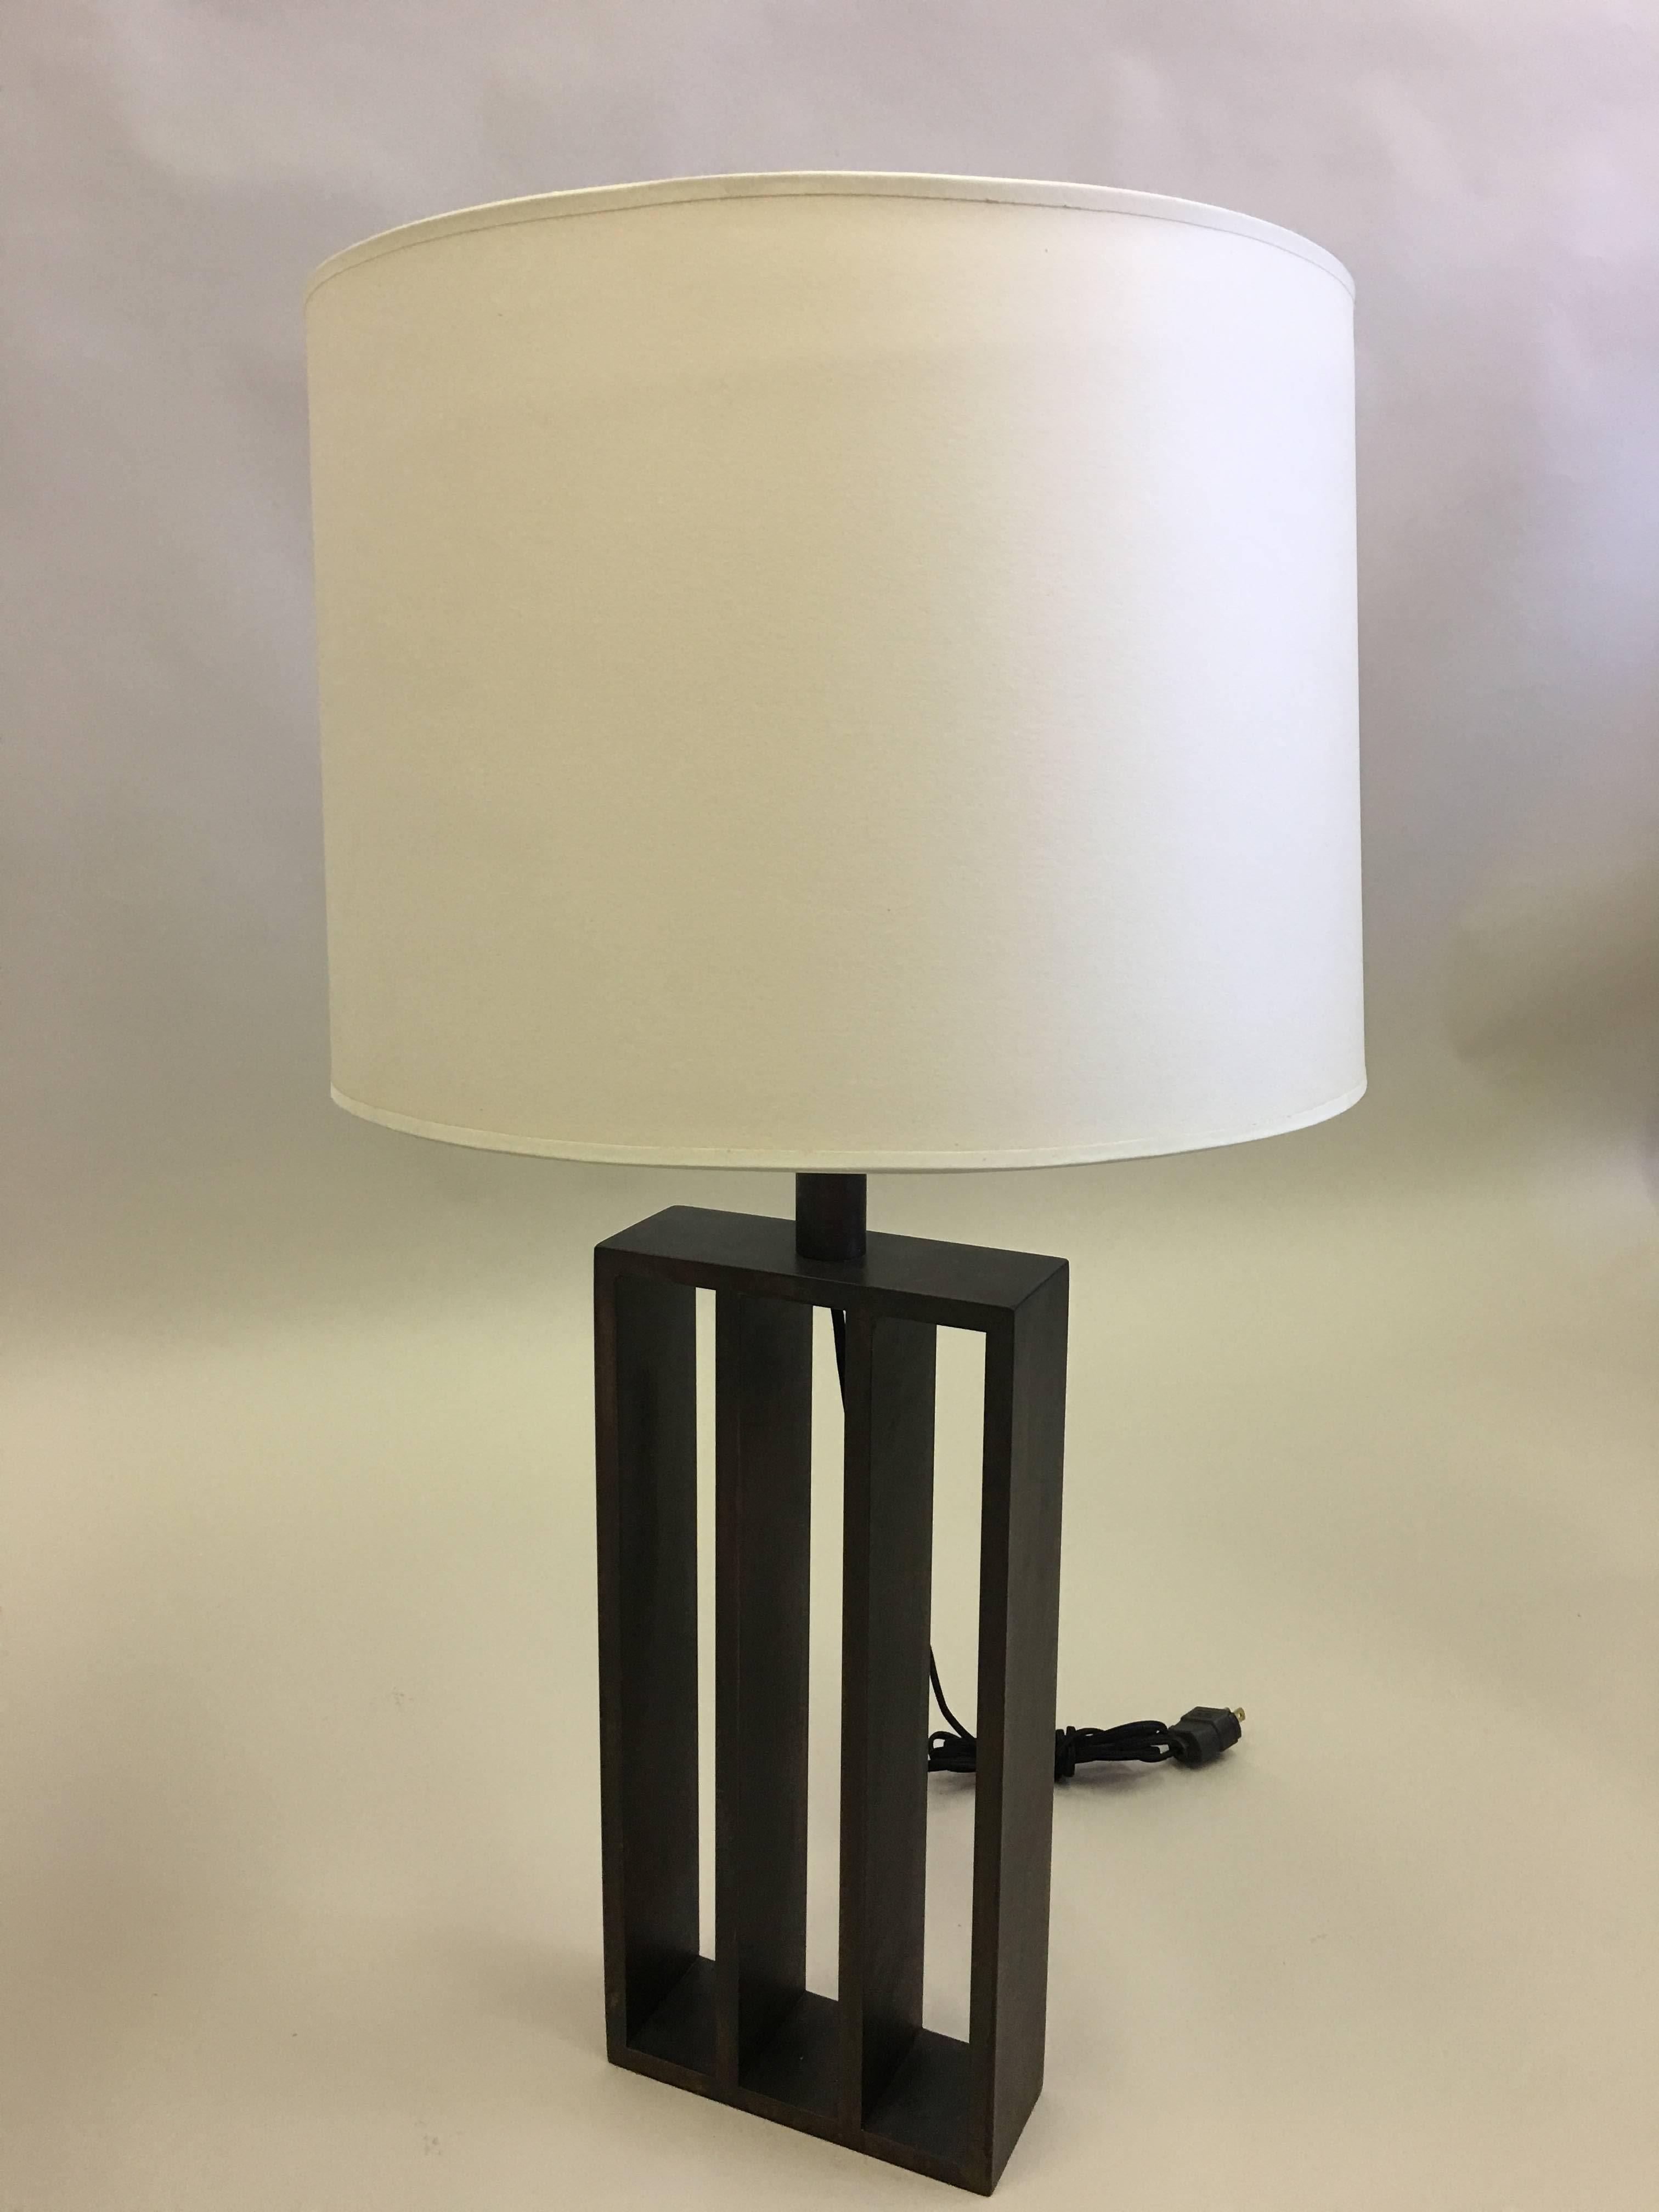 Pair of French Mid-Century Modern style wrought iron table lamps in the Minimalist tradition by Thomas Gargiulo inspired by the work of French architect or designer, Jacques Quinet and the American artist, Sol Le Witt.

The dimensions of the base